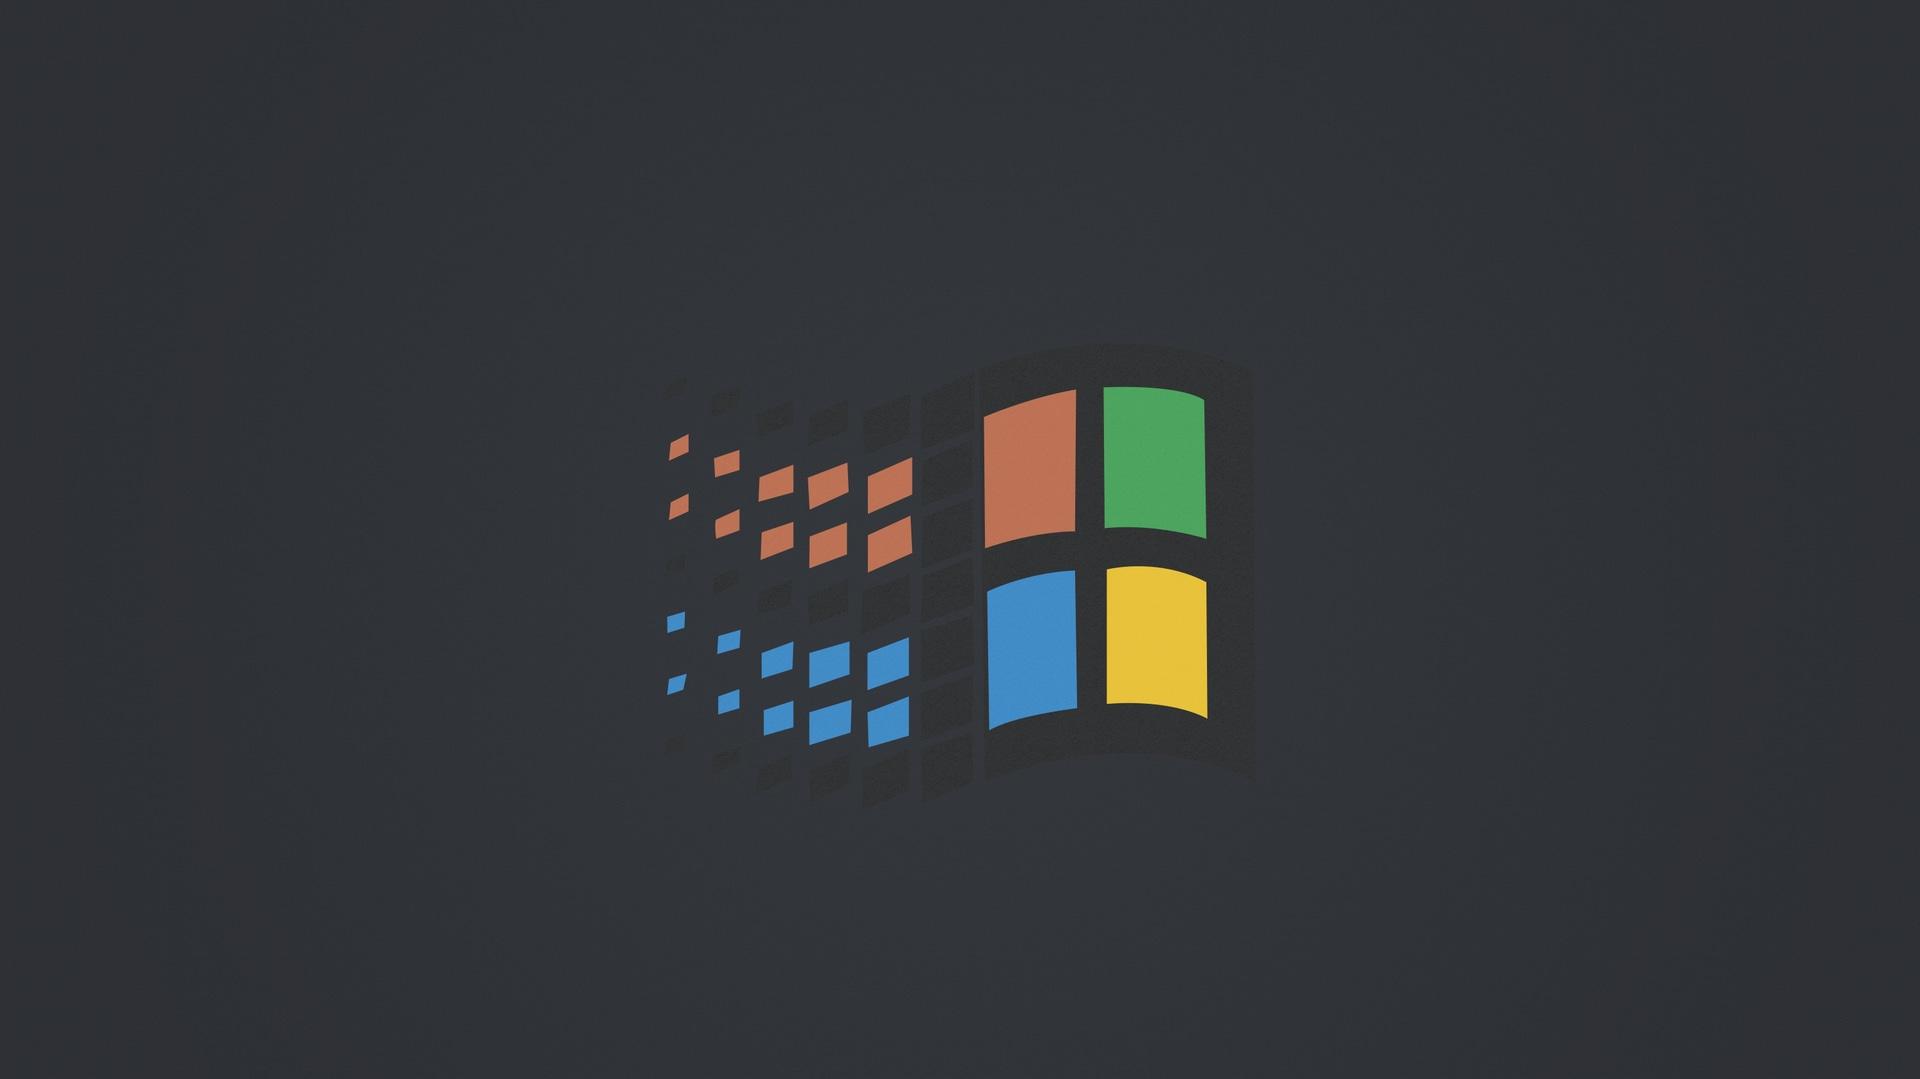 407397 Windows 98, Microsoft, Windows 95, Microsoft Windows - Rare Gallery  HD Wallpapers